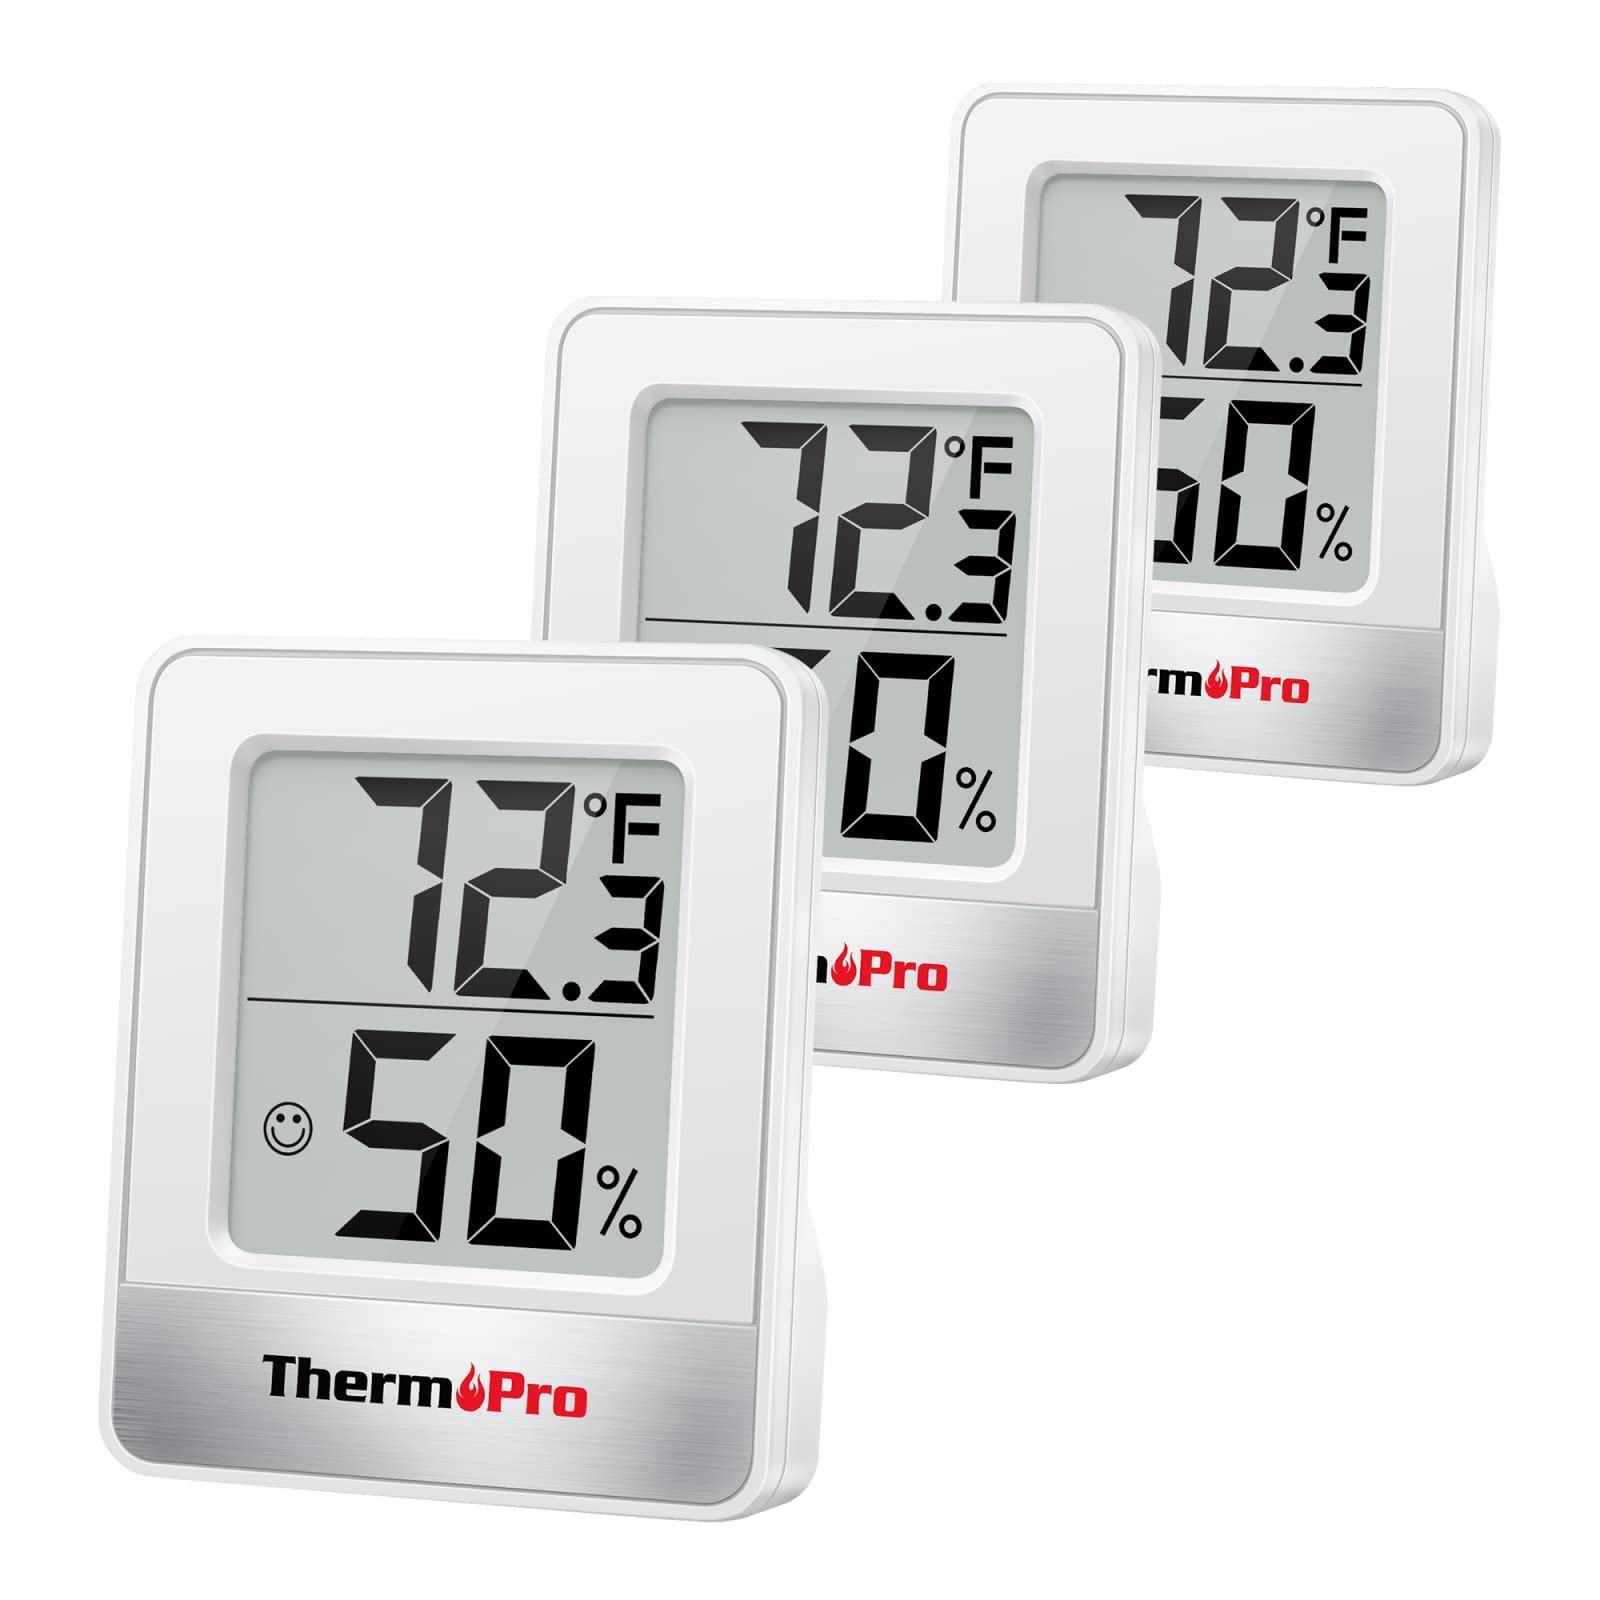 ThermoPro TP49 Digital Hygrometer Indoor Thermometer